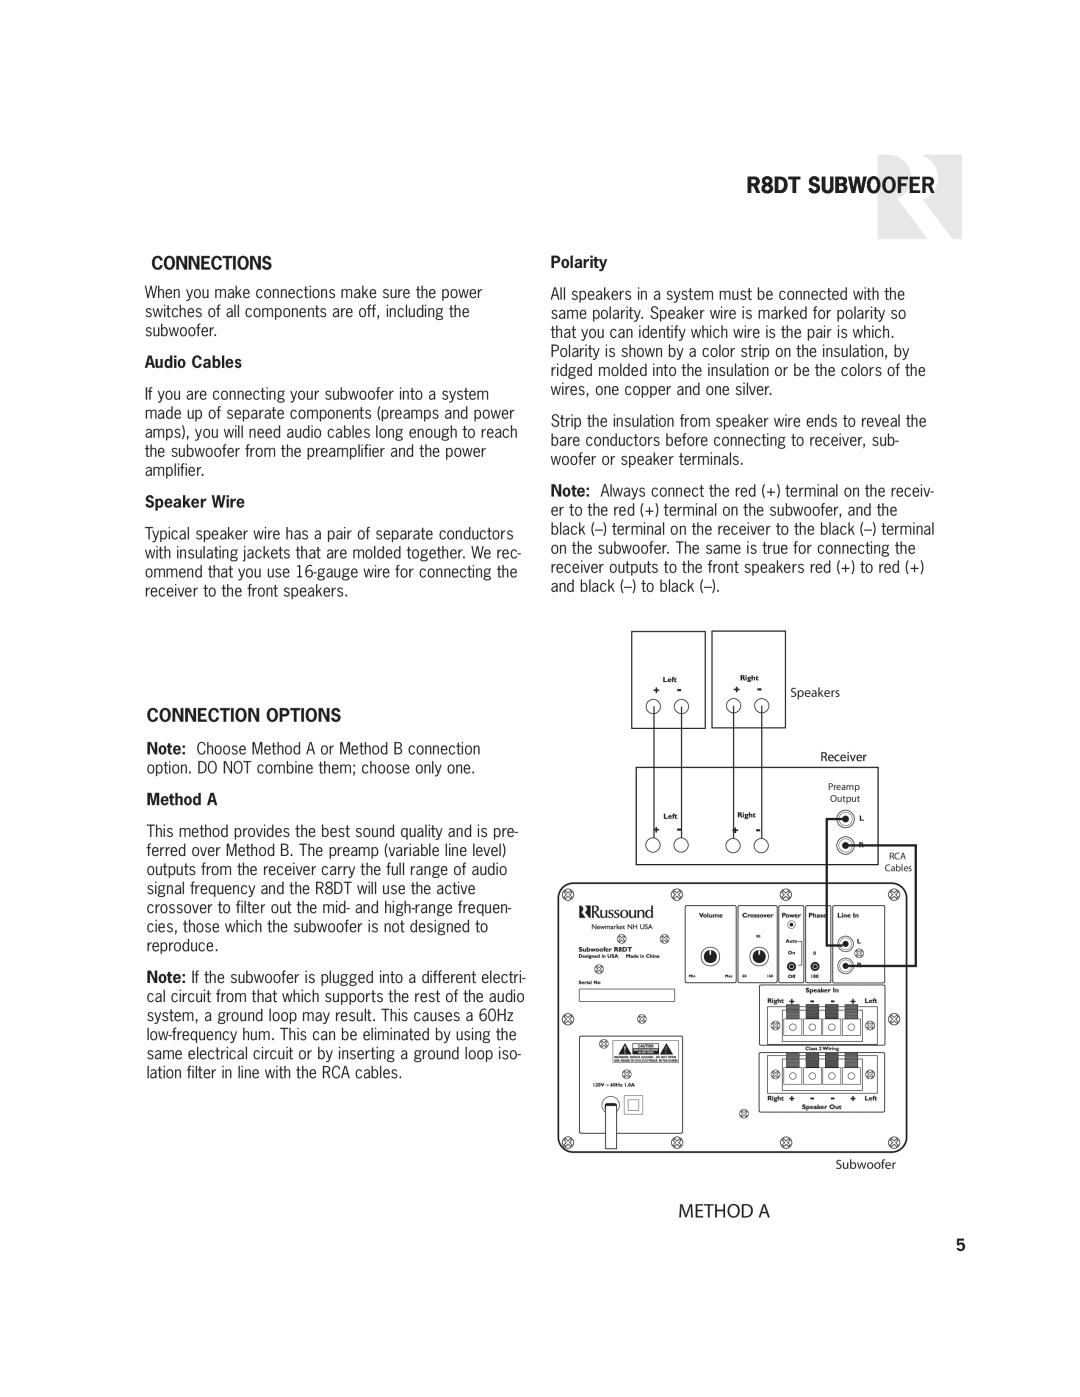 Home Theater Direct user manual Connections, Connection Options, R8DT SUBWOOFER, Method A 